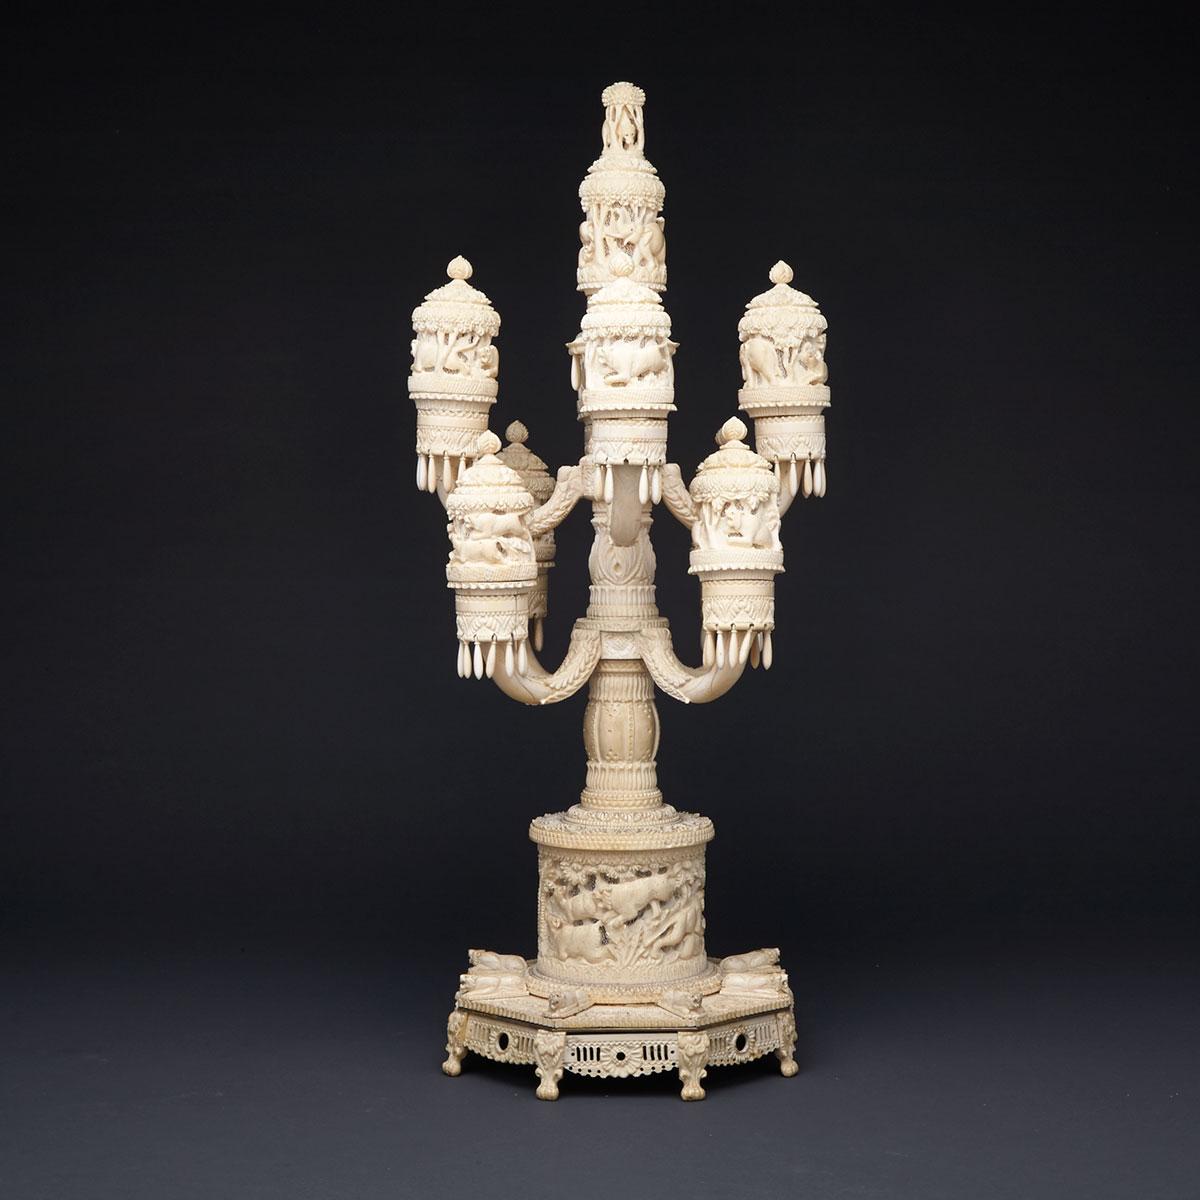 Anglo-Indian Carved Ivory Candelabrum Form Cricket Cage Stand, 19th century